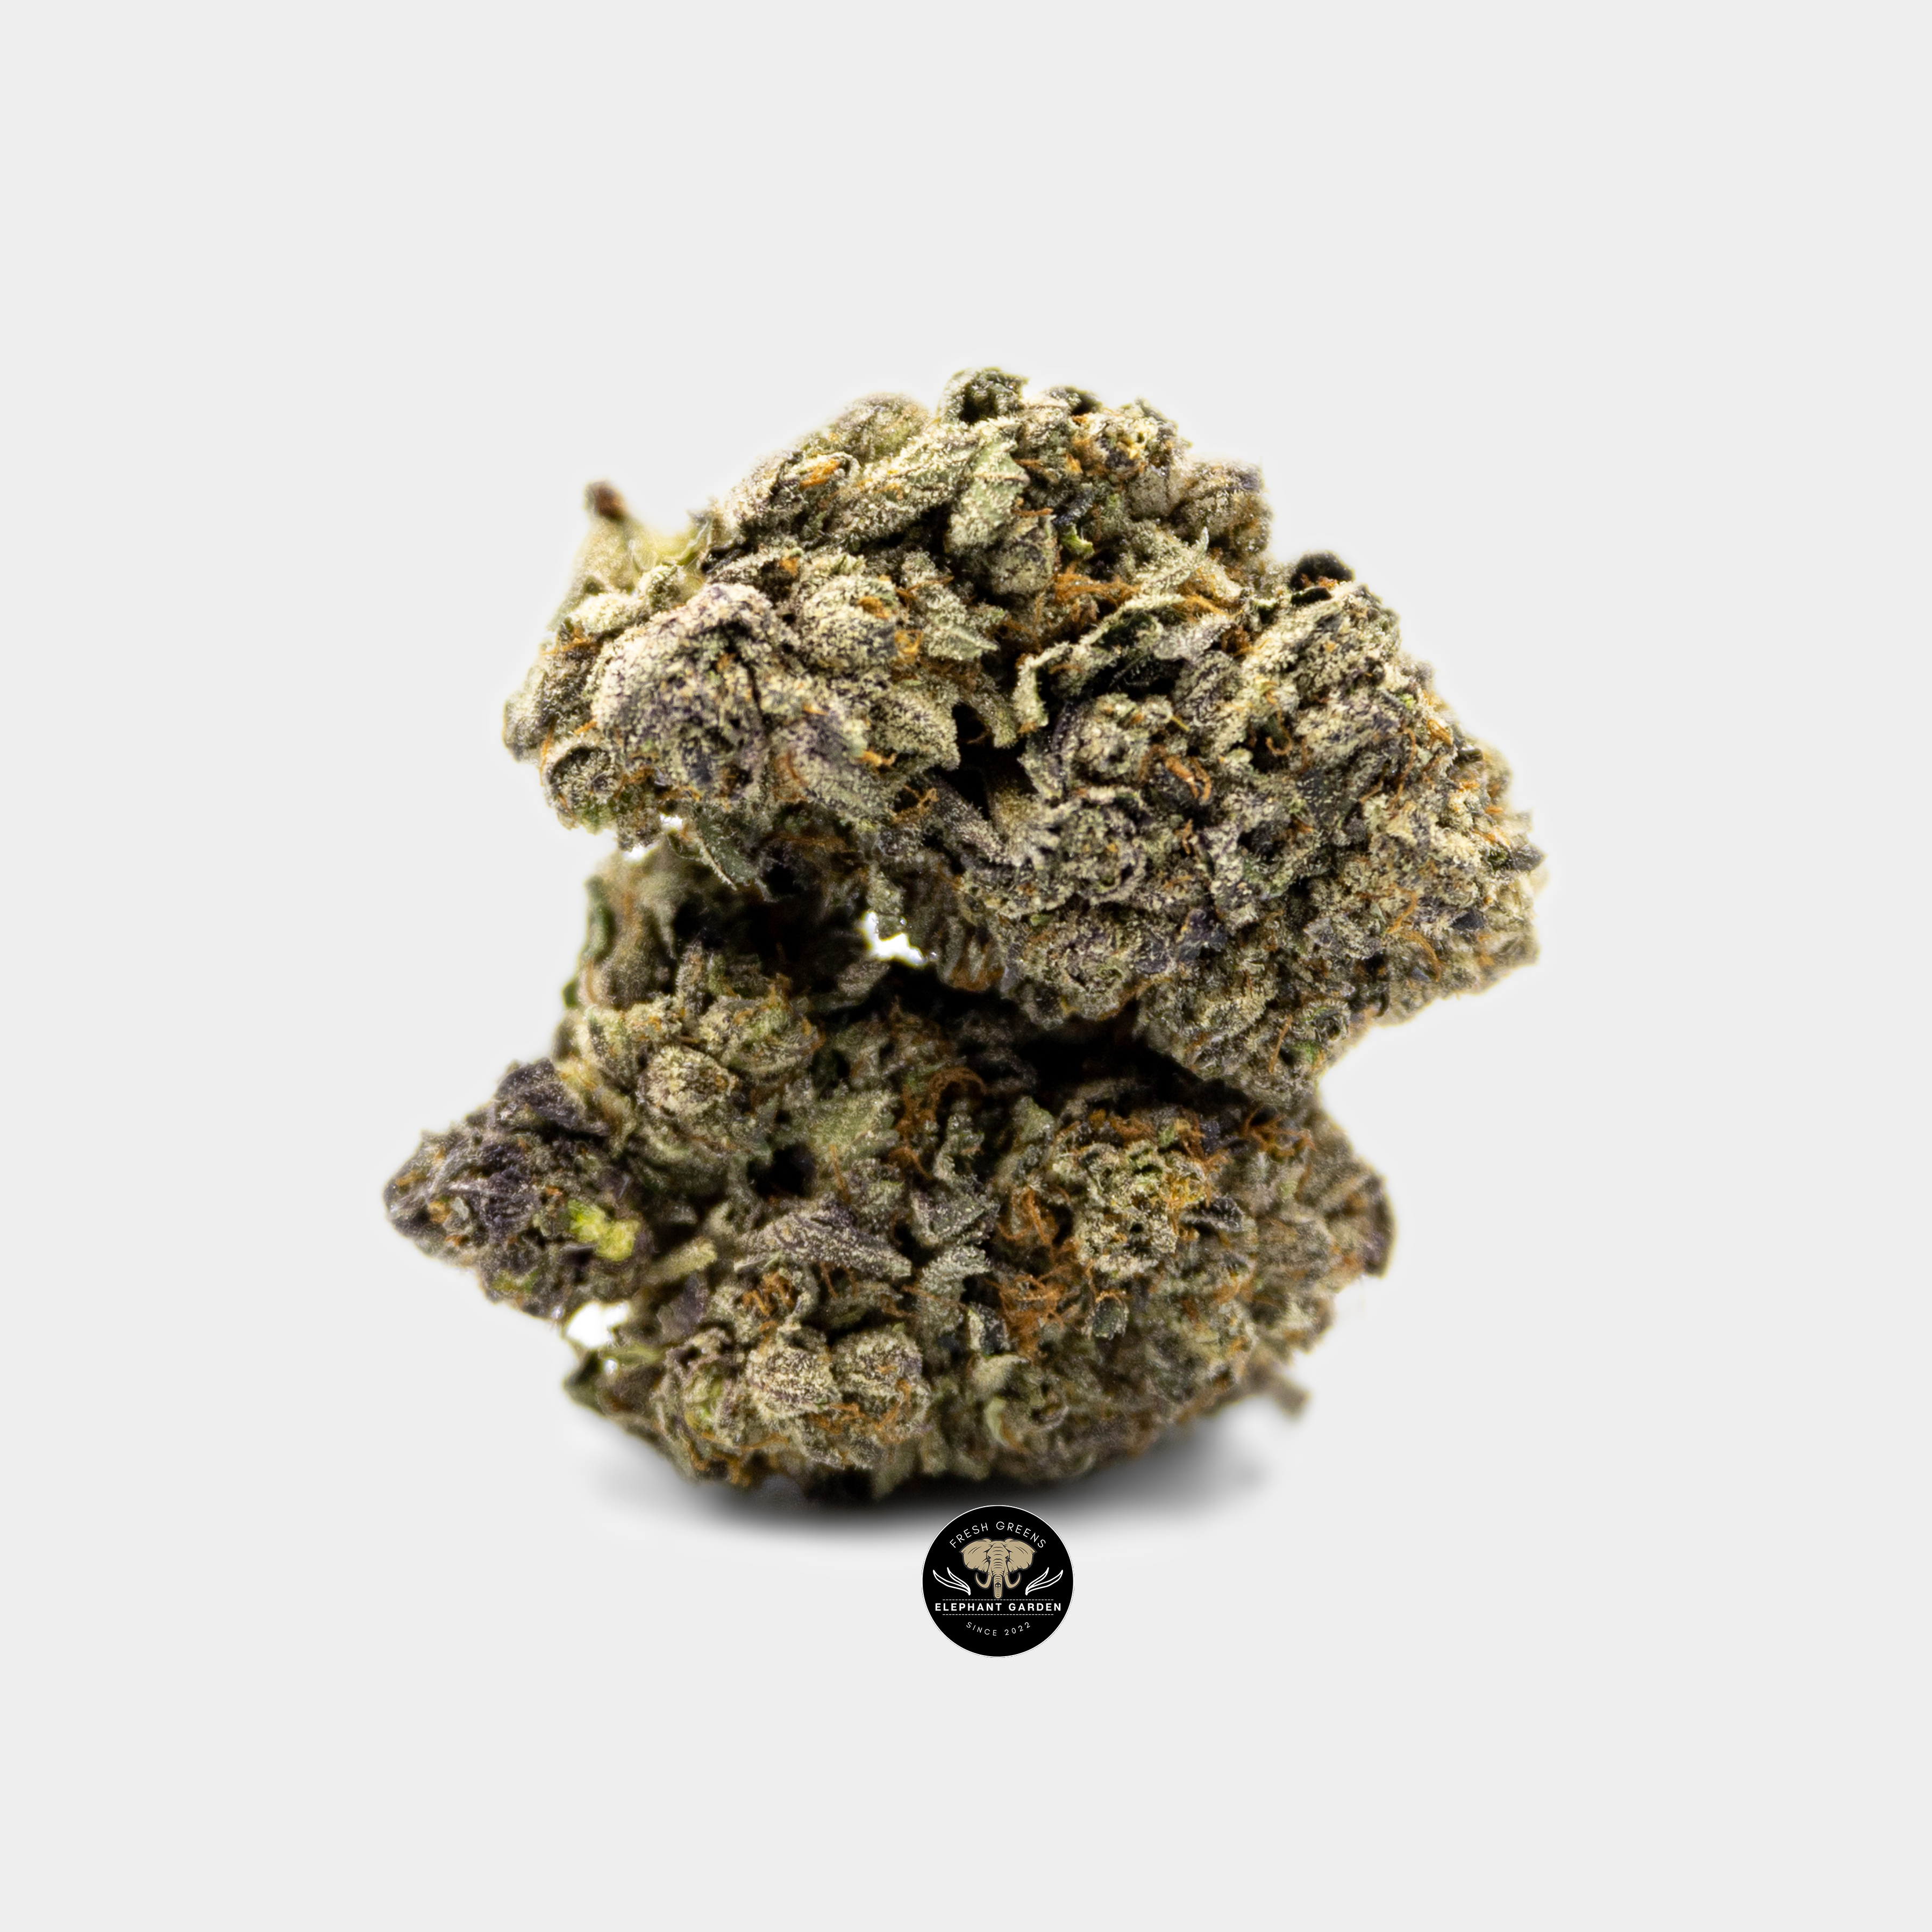 Buy Purple Punch at Elephant Garden Co Weed Dispensary Bundle